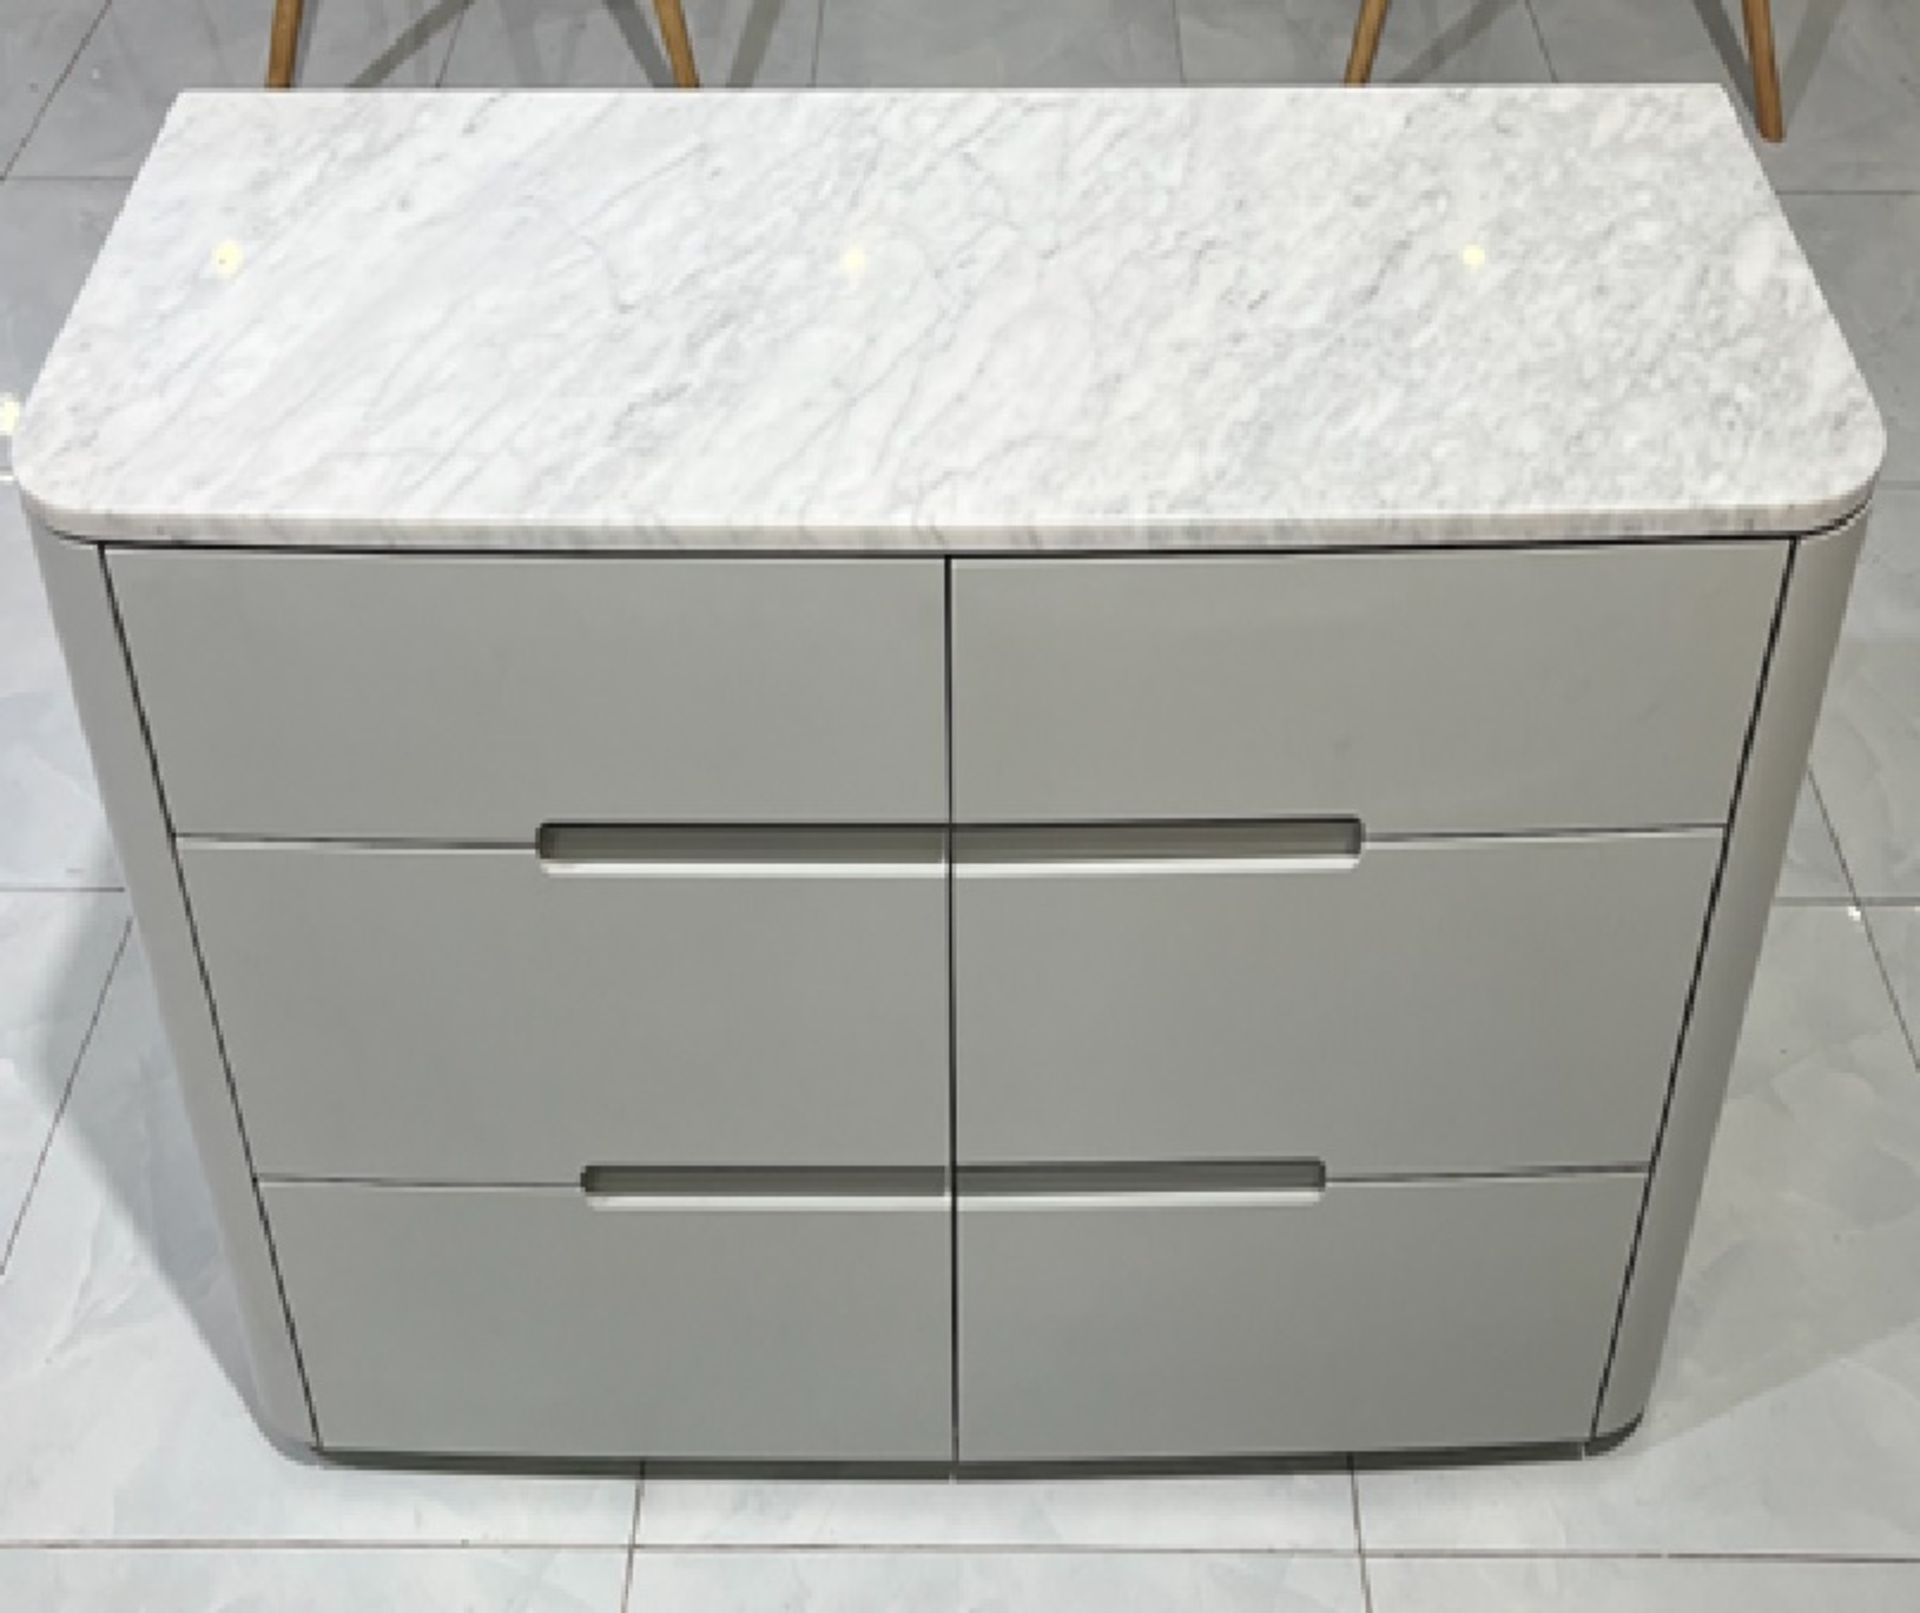 Florence 6 Drawer Bedroom Chest With Italian Carrara Marble Top Sample Product 120 x 45 x 75cm - Image 3 of 3